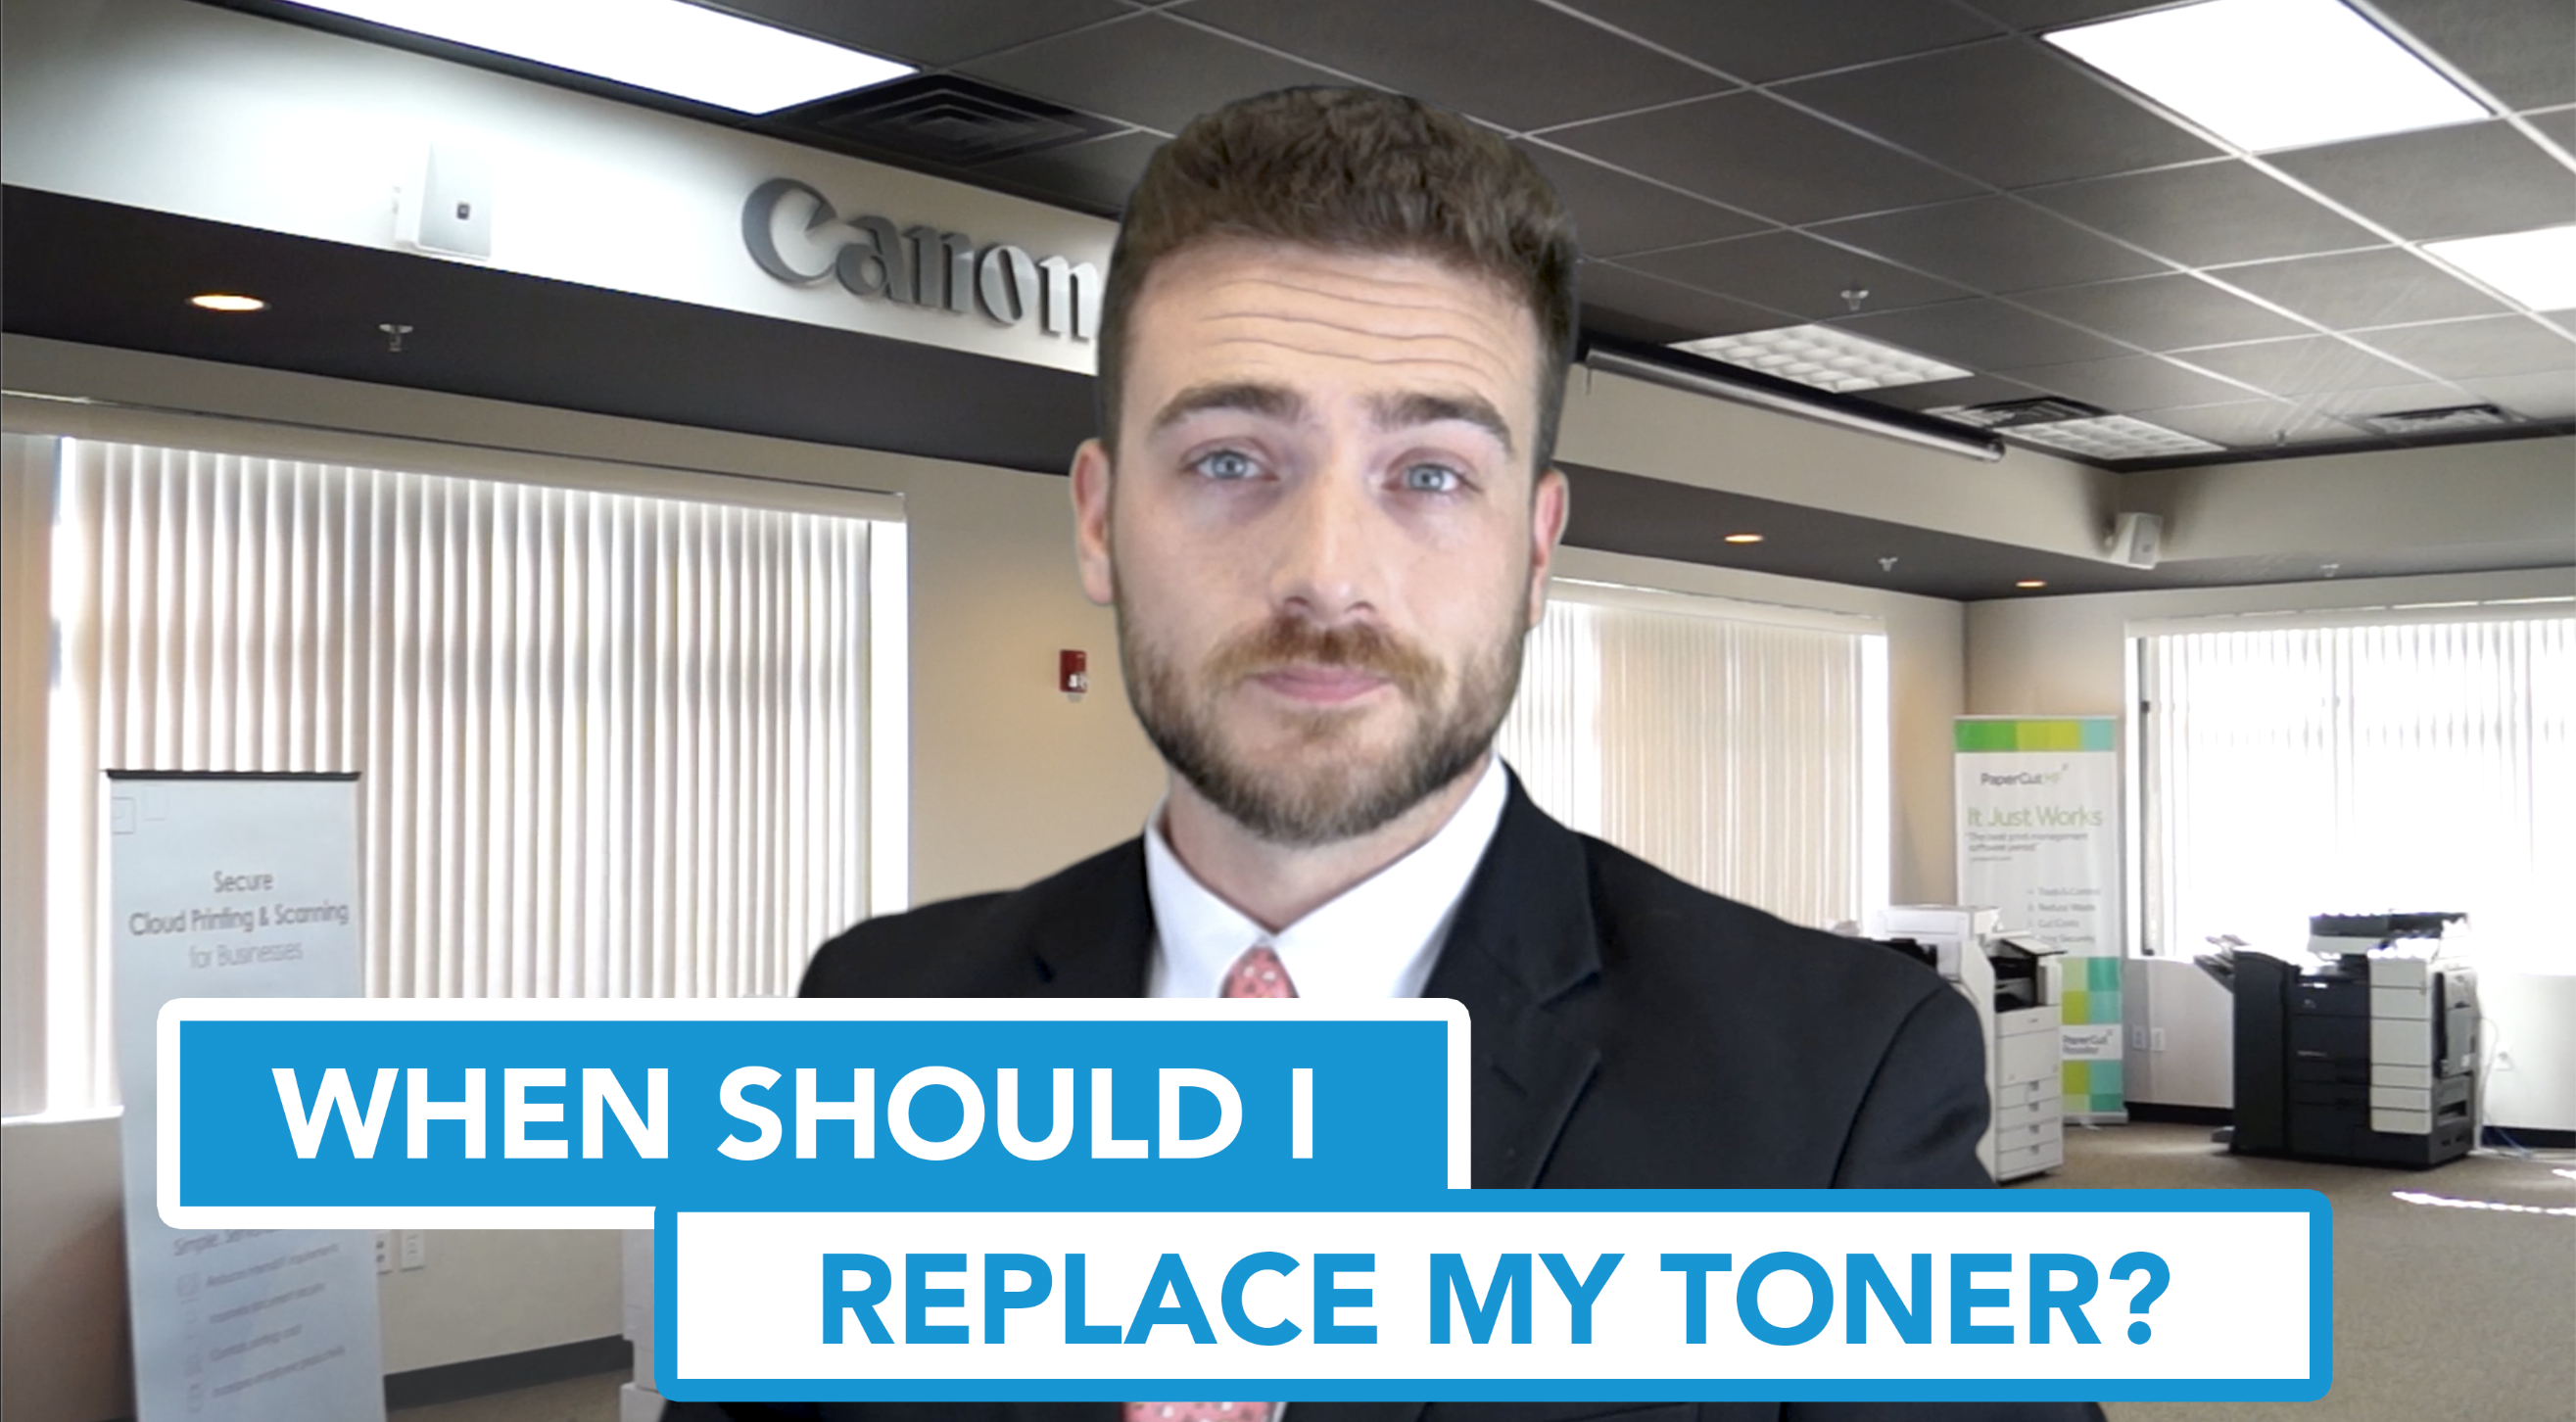 When should I replace my toner